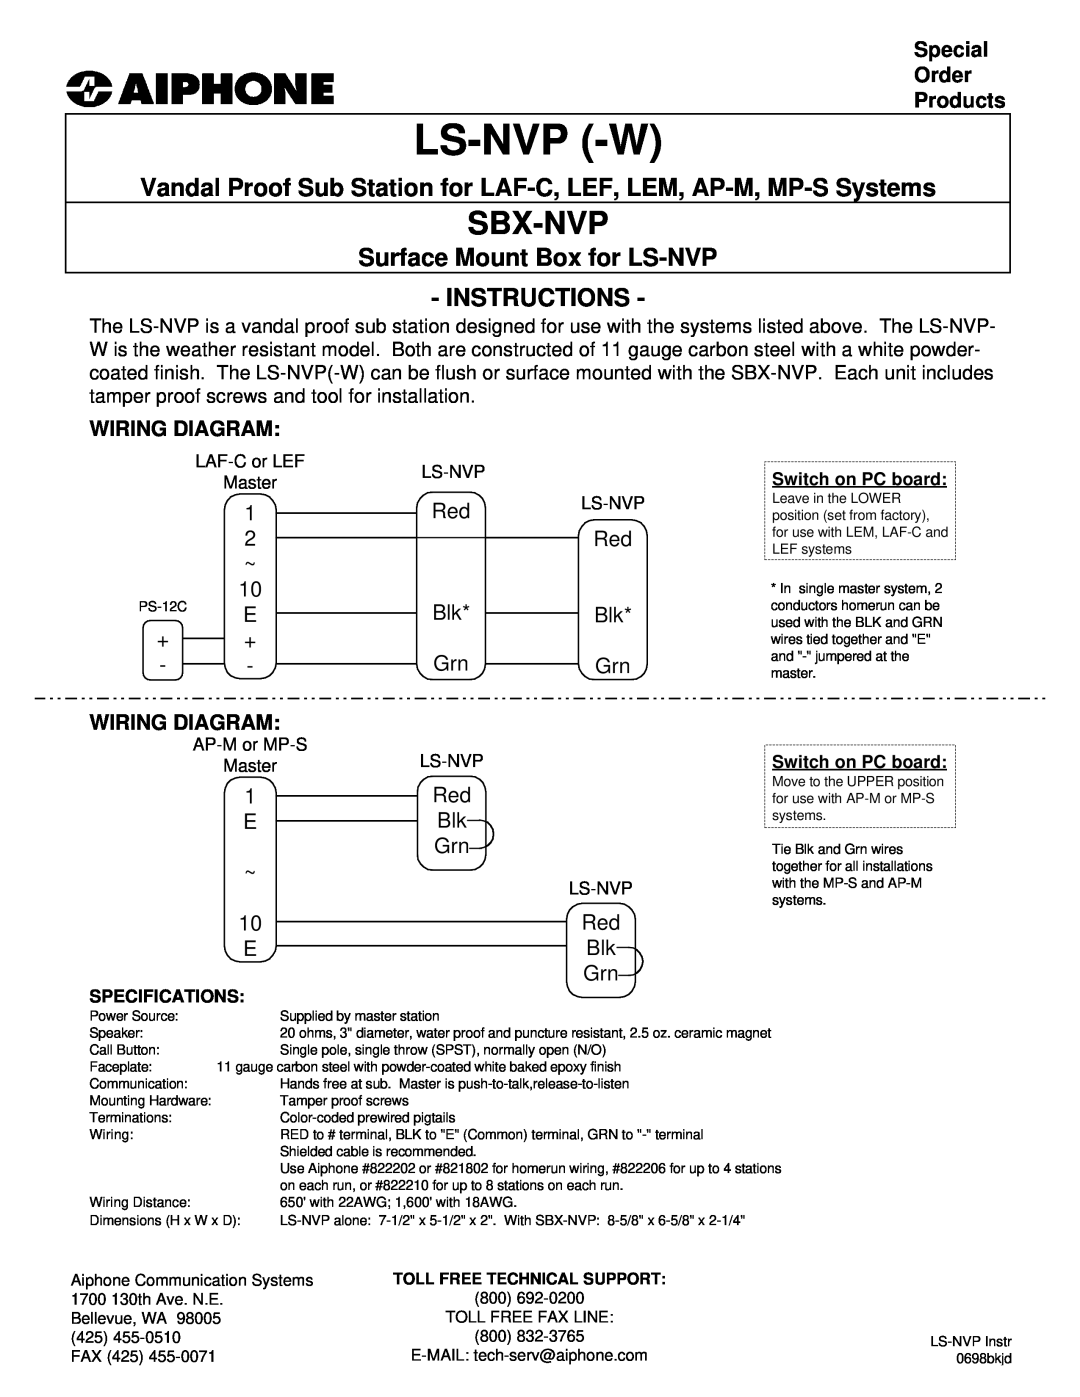 Aiphone AP-M, LAF-C specifications Ls-Nvp -W, Sbx-Nvp, Surface Mount Box for LS-NVP INSTRUCTIONS, Special Order Products 